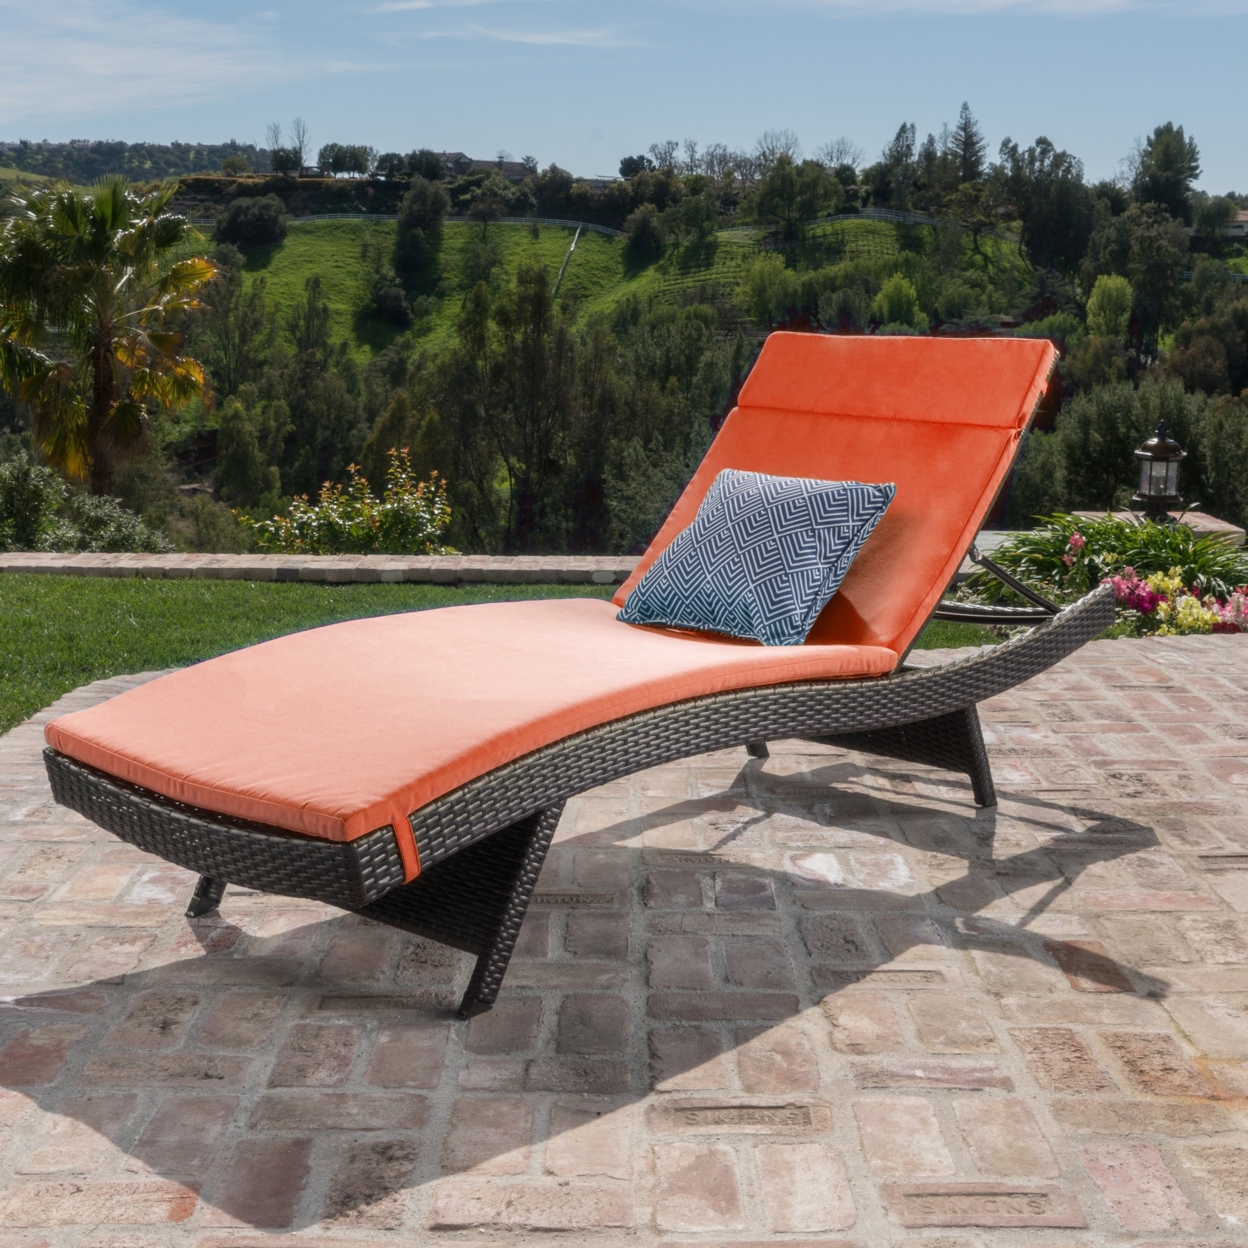 Savana Outdoor Wicker Lounge With Water Resistant Cushion - Multibrown/orange, Qty Of 2